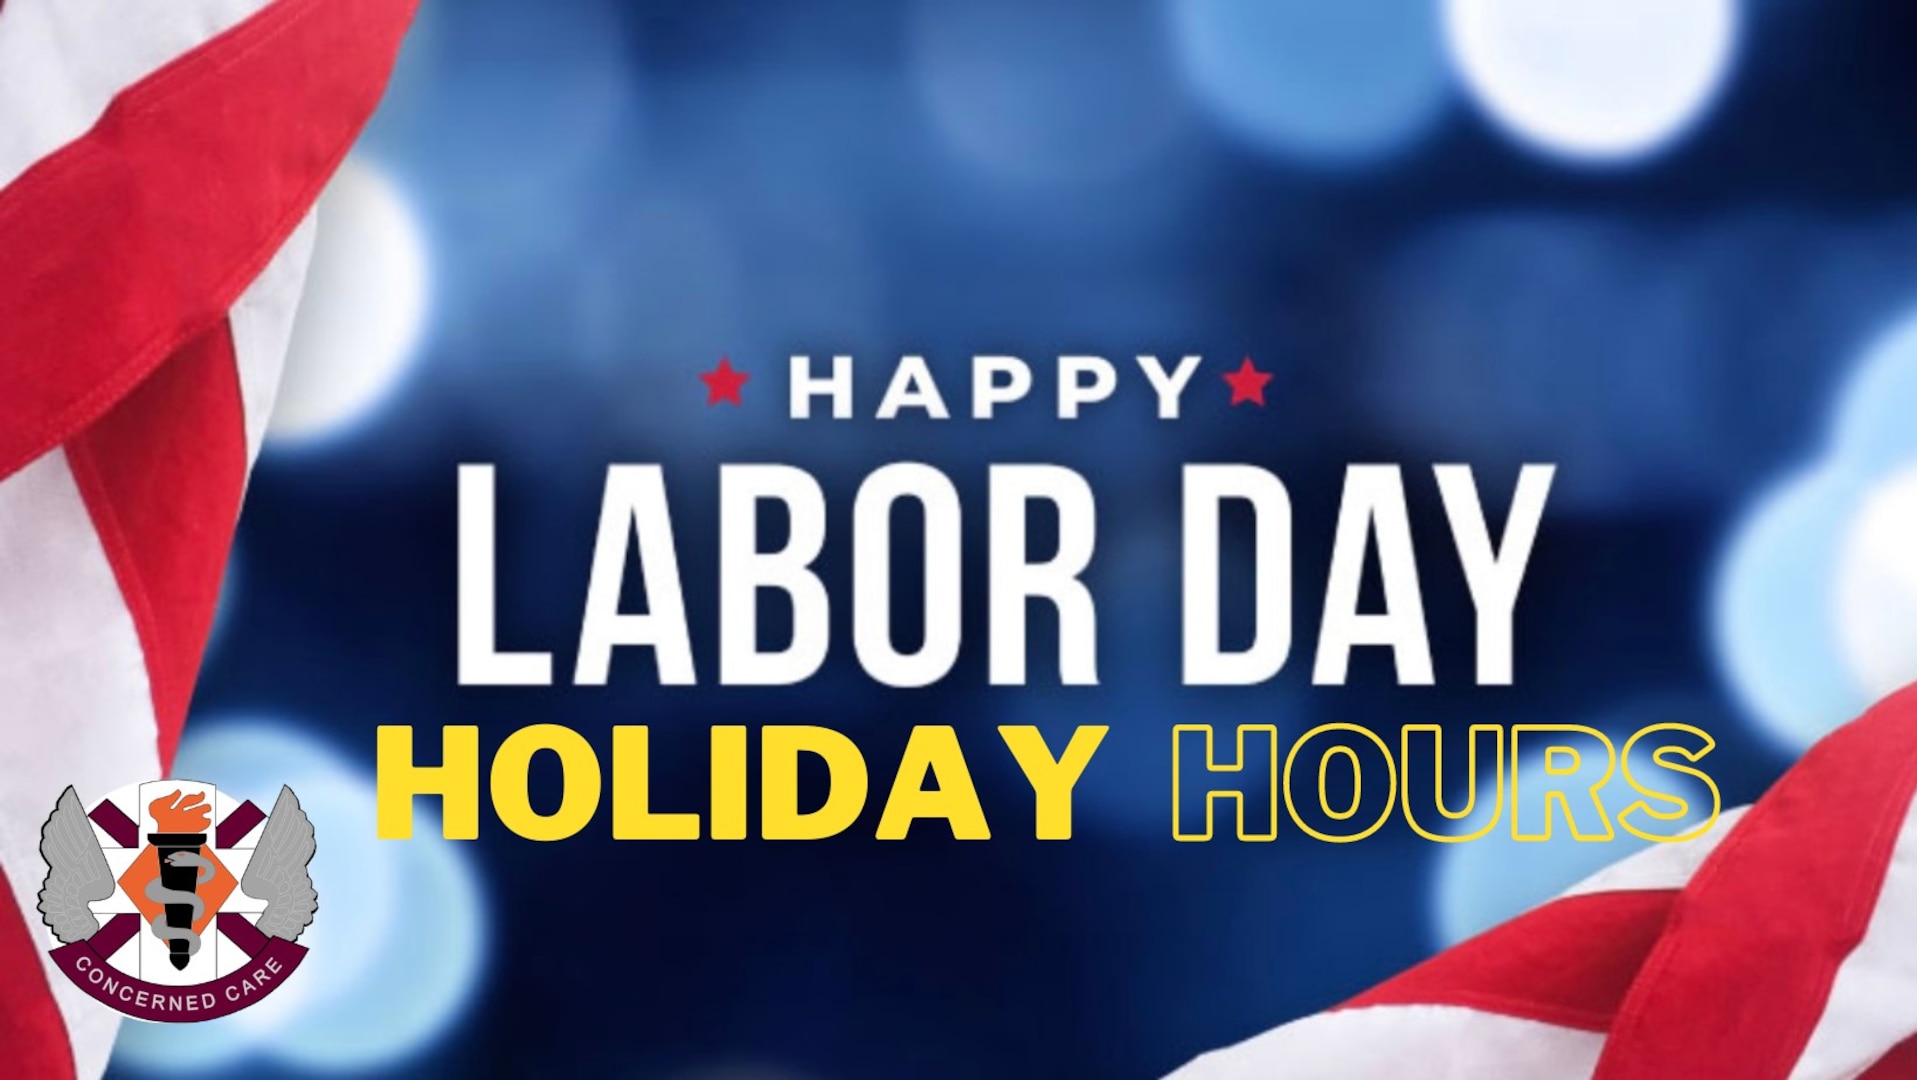 Labor Day Holiday Hours > Desmond Doss Health Clinic > Articles